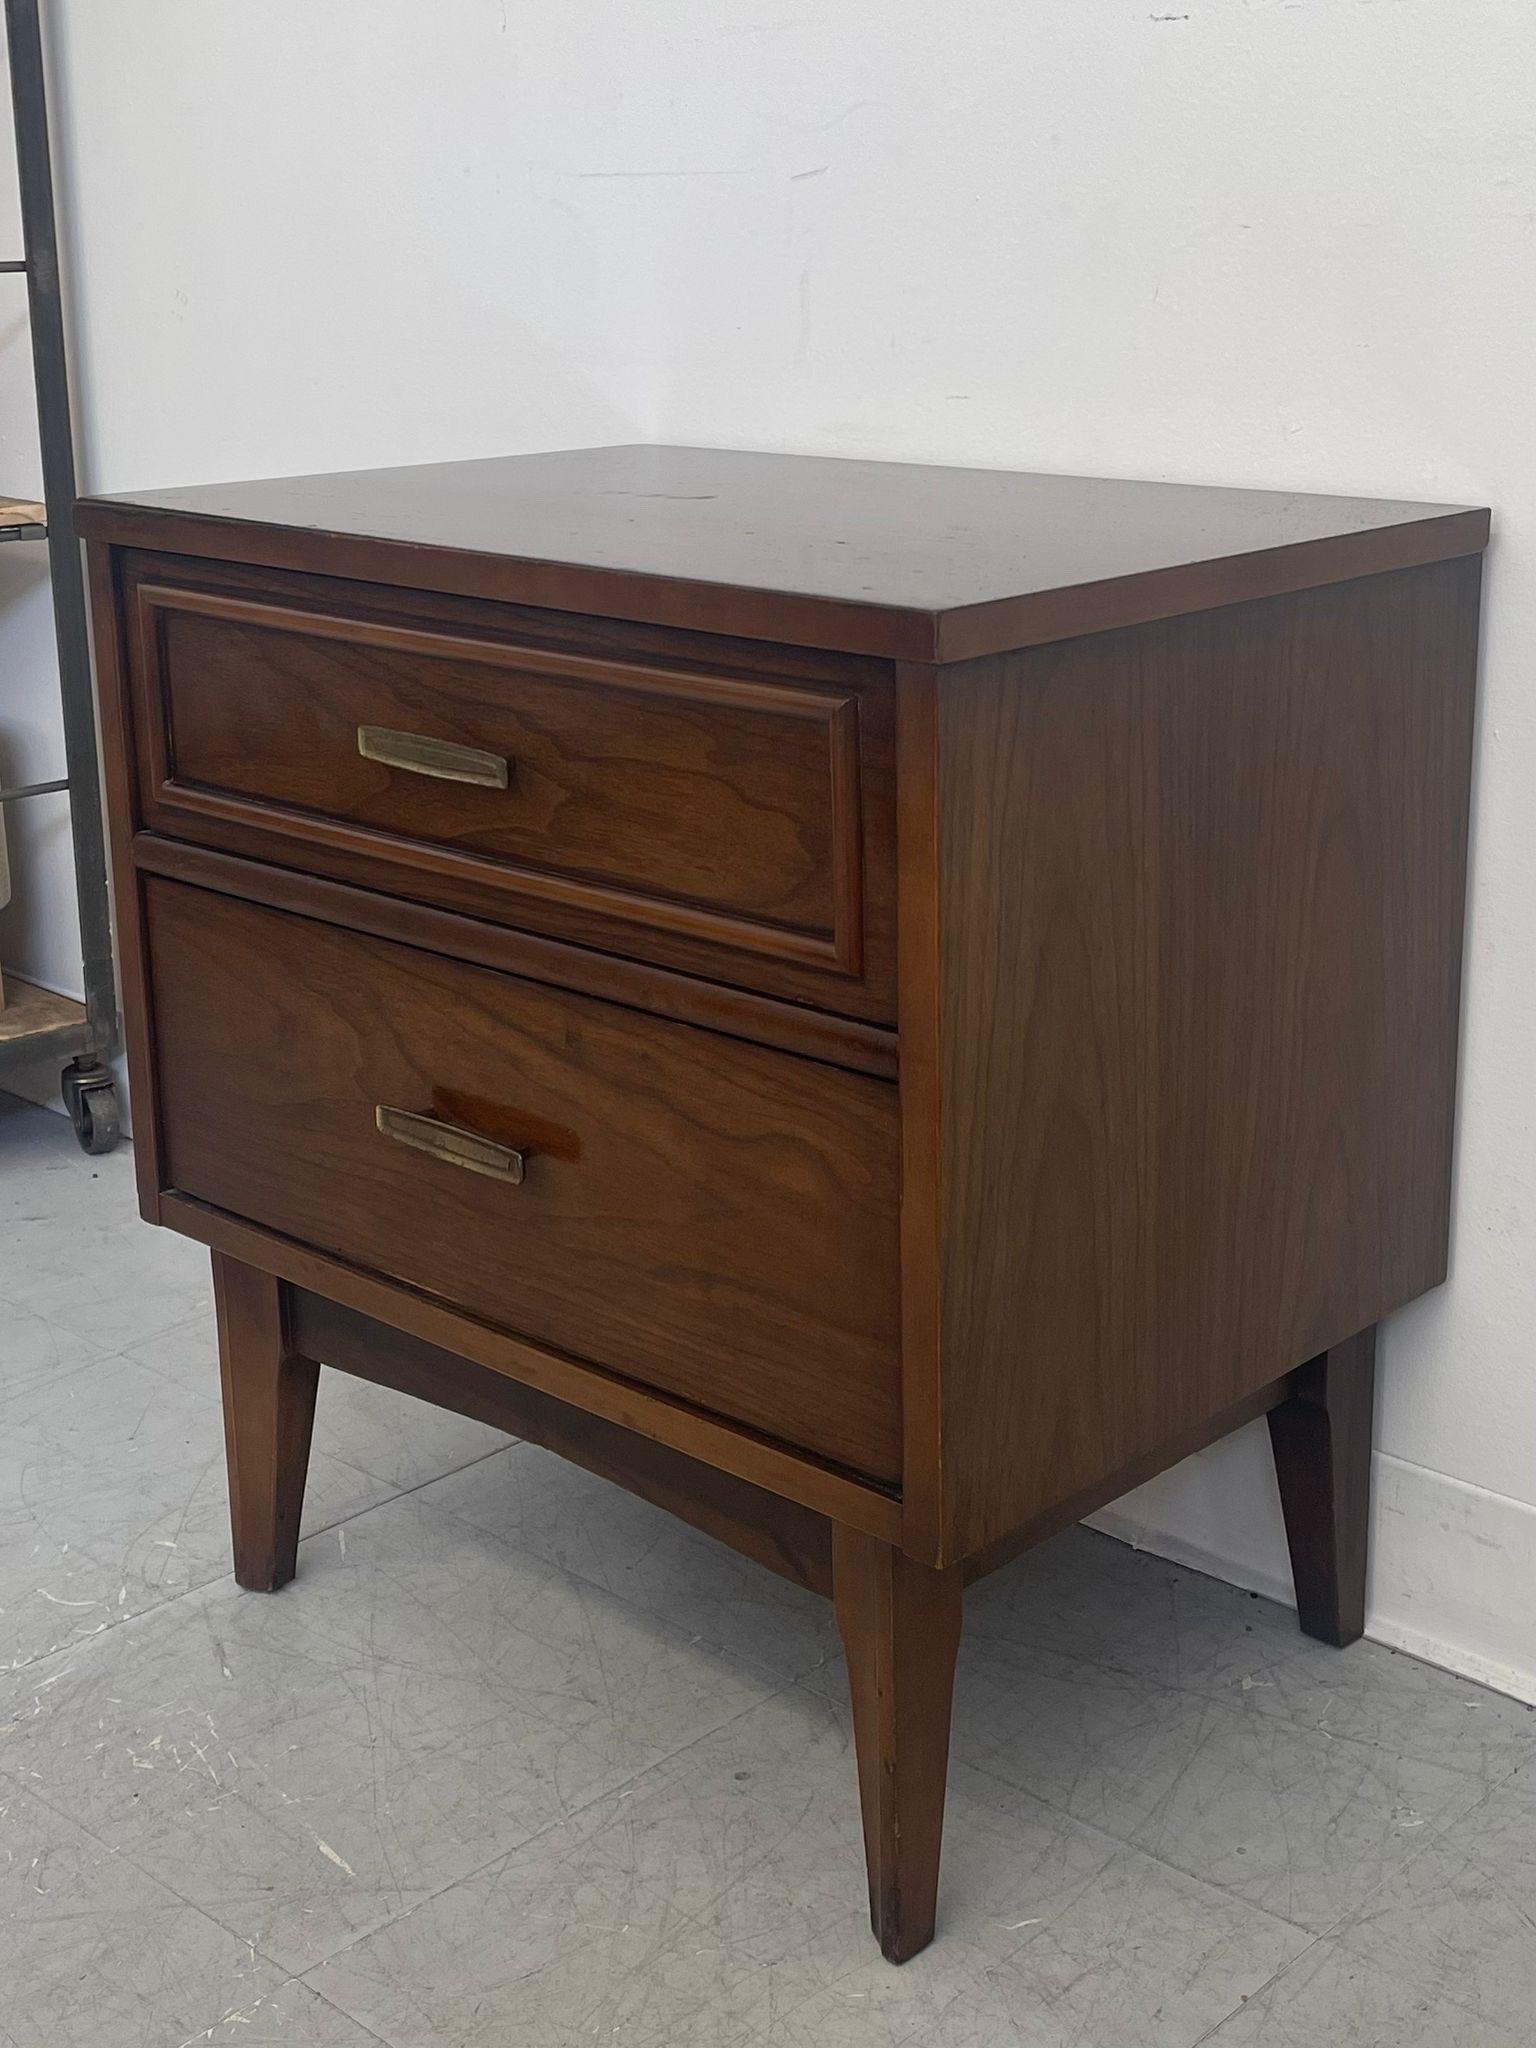 This End table has two dovetailed drawers and tapered legs. Unique hardware. Circa 1960s. Vintage condition consistent with age as Pictured.

Dimensions. 22 W ; 15 D ; 23 H